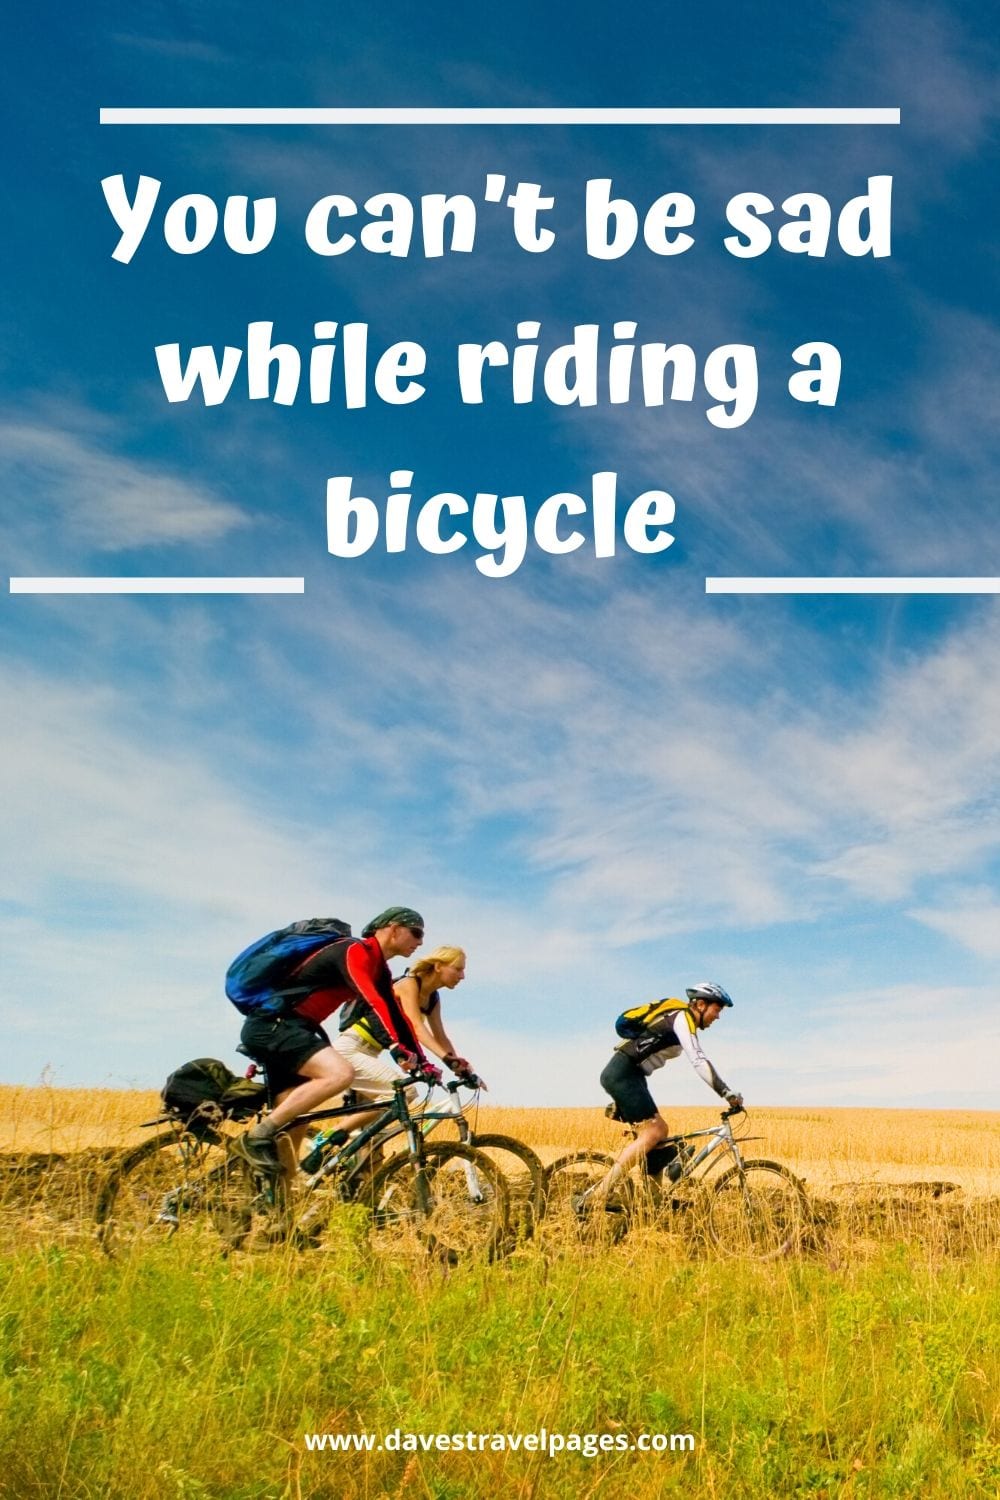 One of the best cycling quotes - You can’t be sad while riding a bicycle.